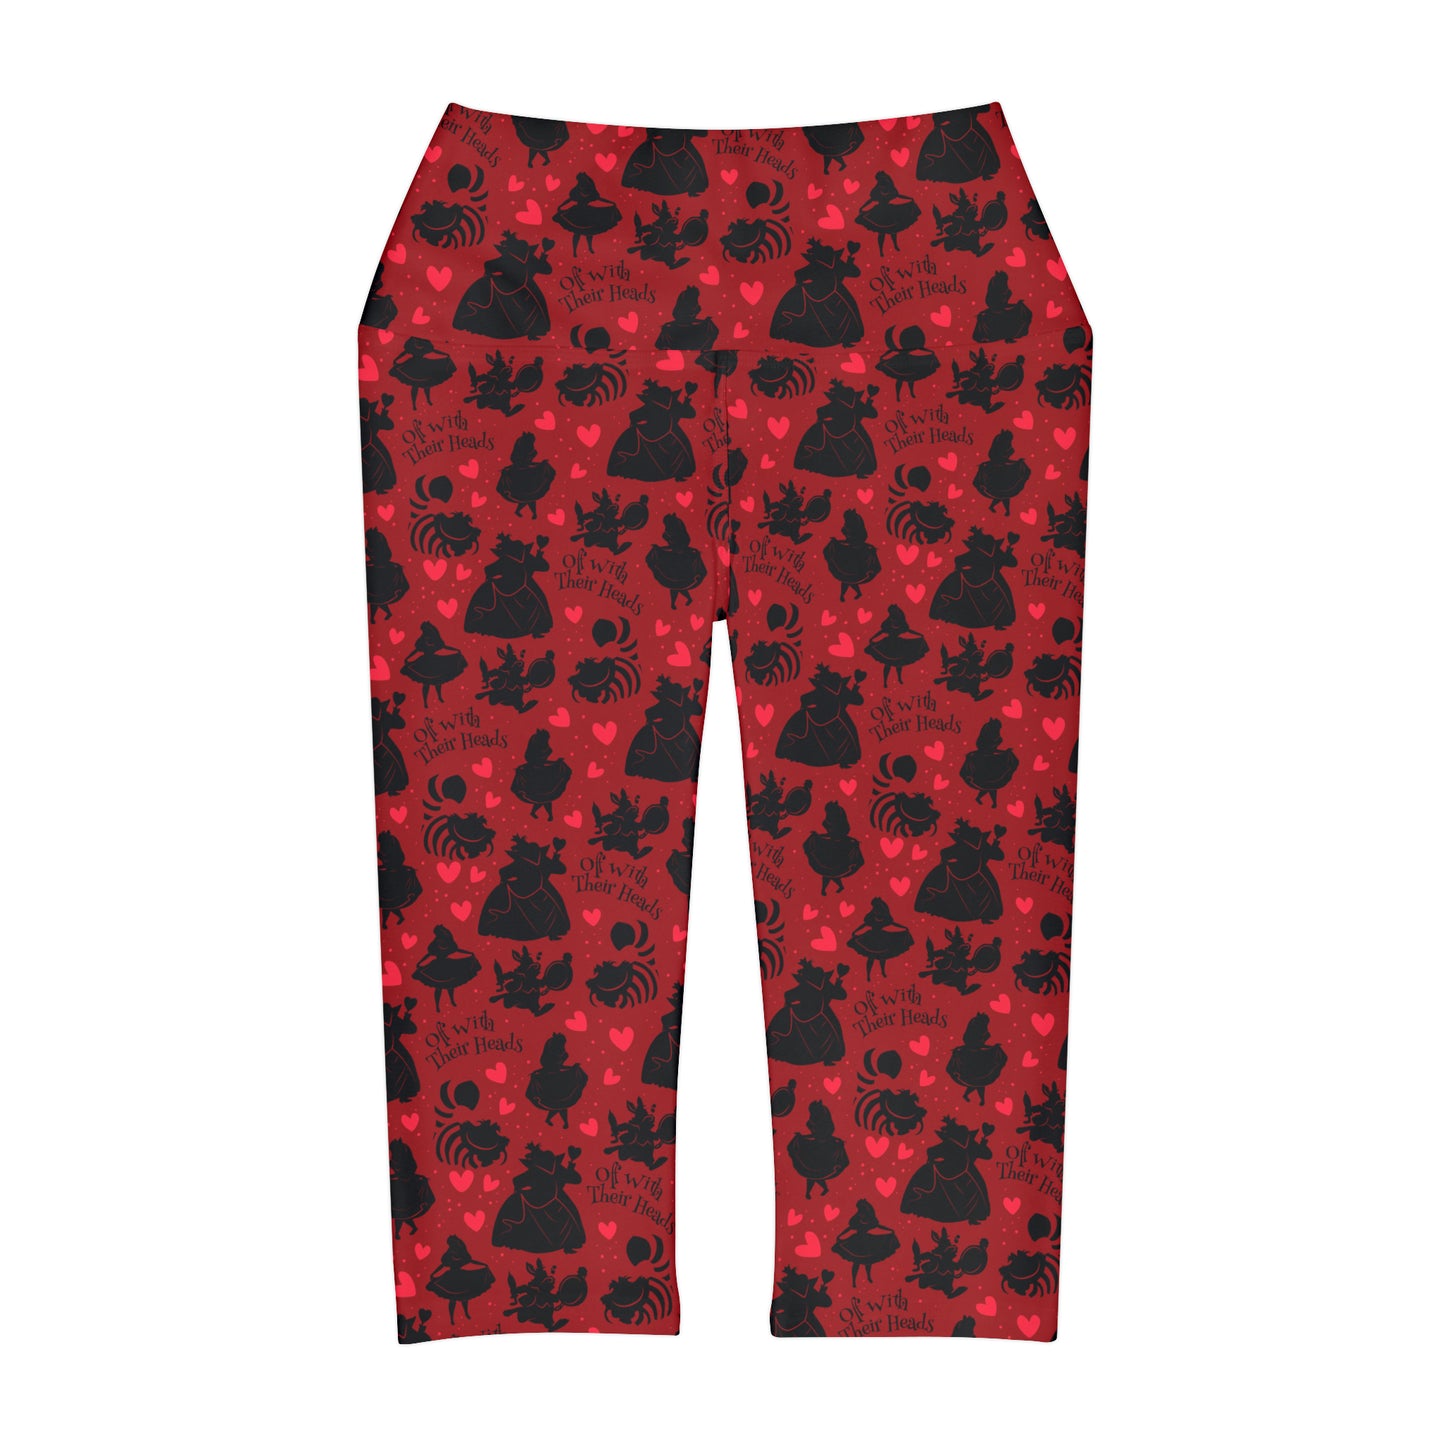 Off With Their Heads Athletic Capri Leggings